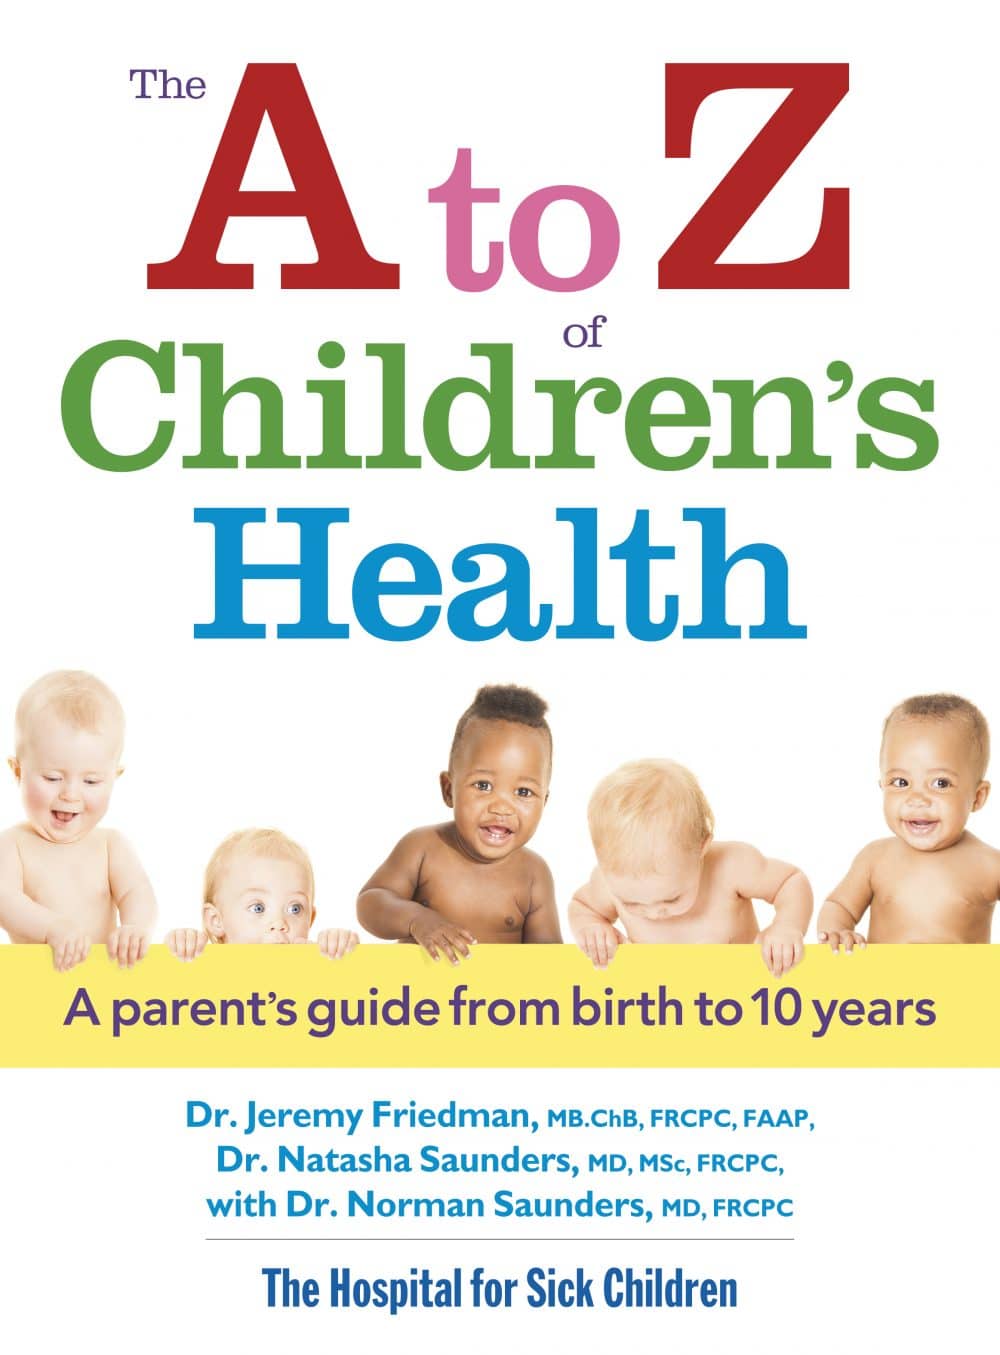 A to Z Children’s Health from The Hospital for Sick Children